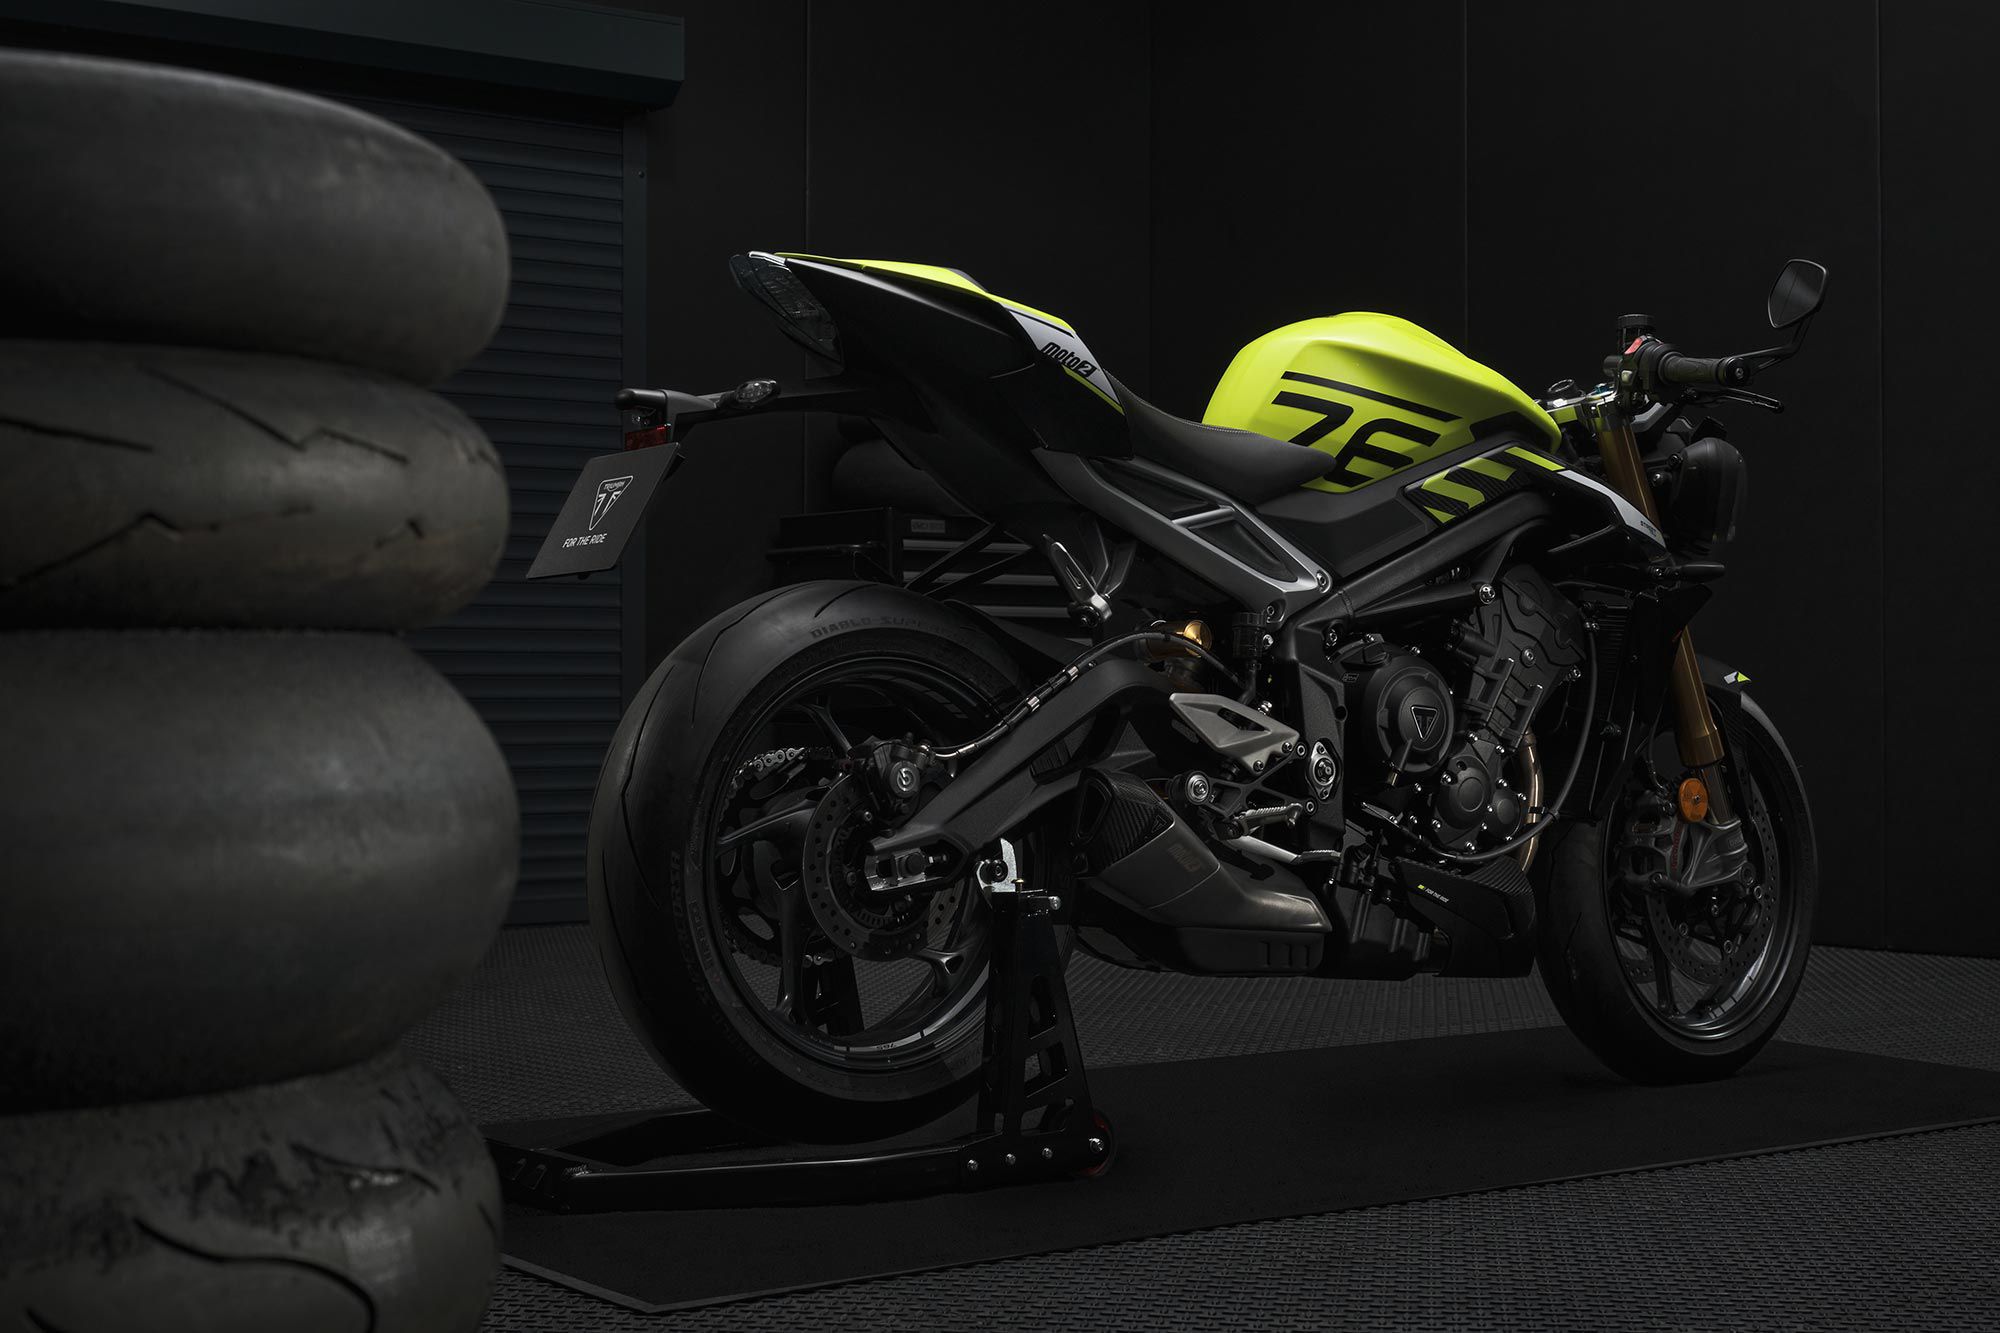 The limited-edition Street Triple 765 Moto2, shown in Triumph Racing Yellow.